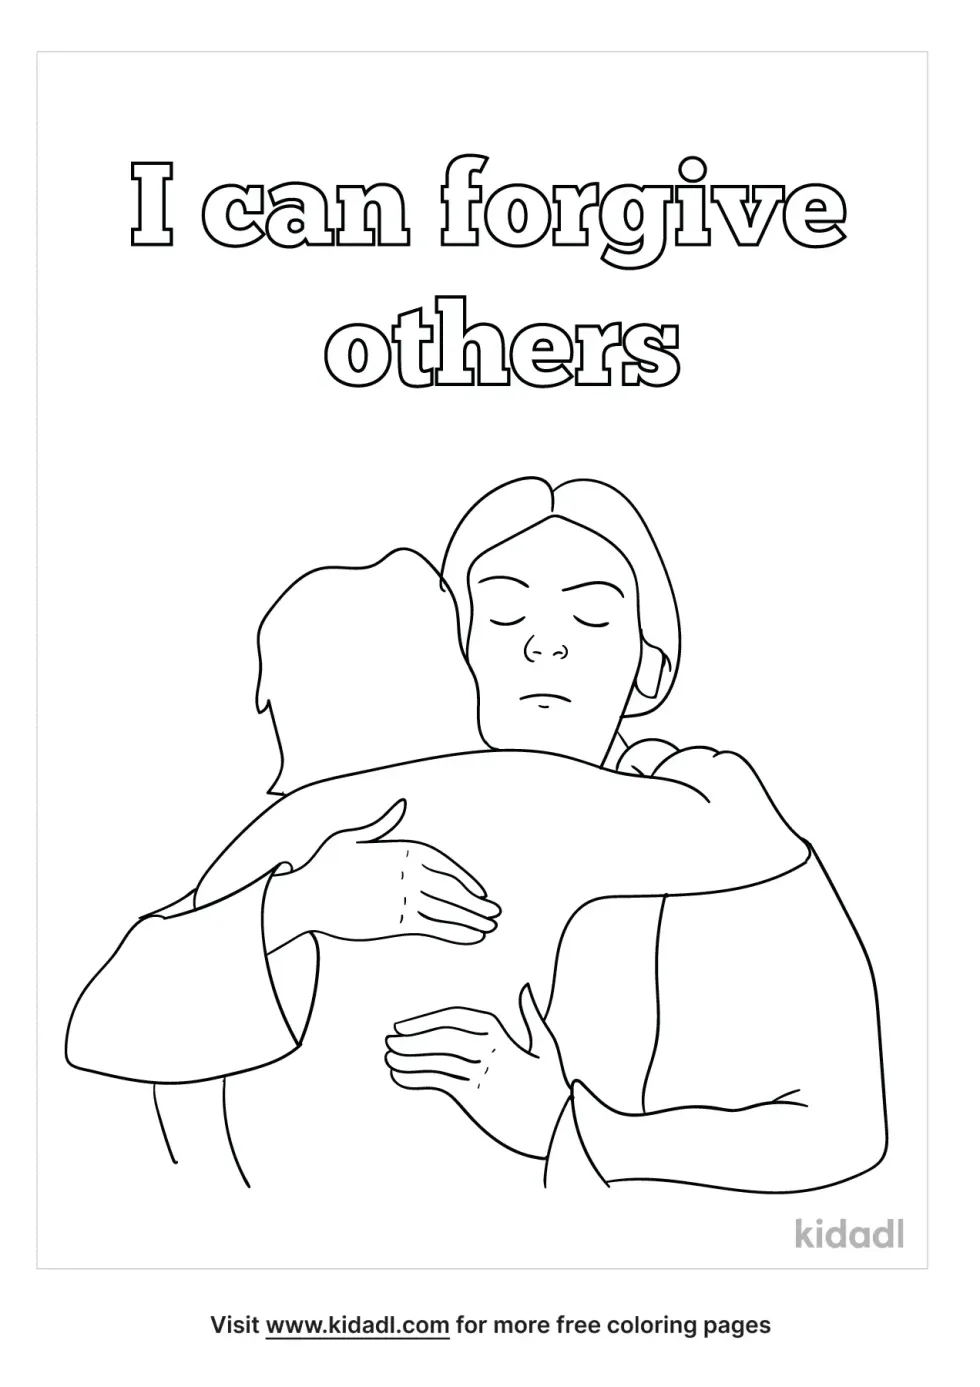 I Can Forgive Others Coloring Page